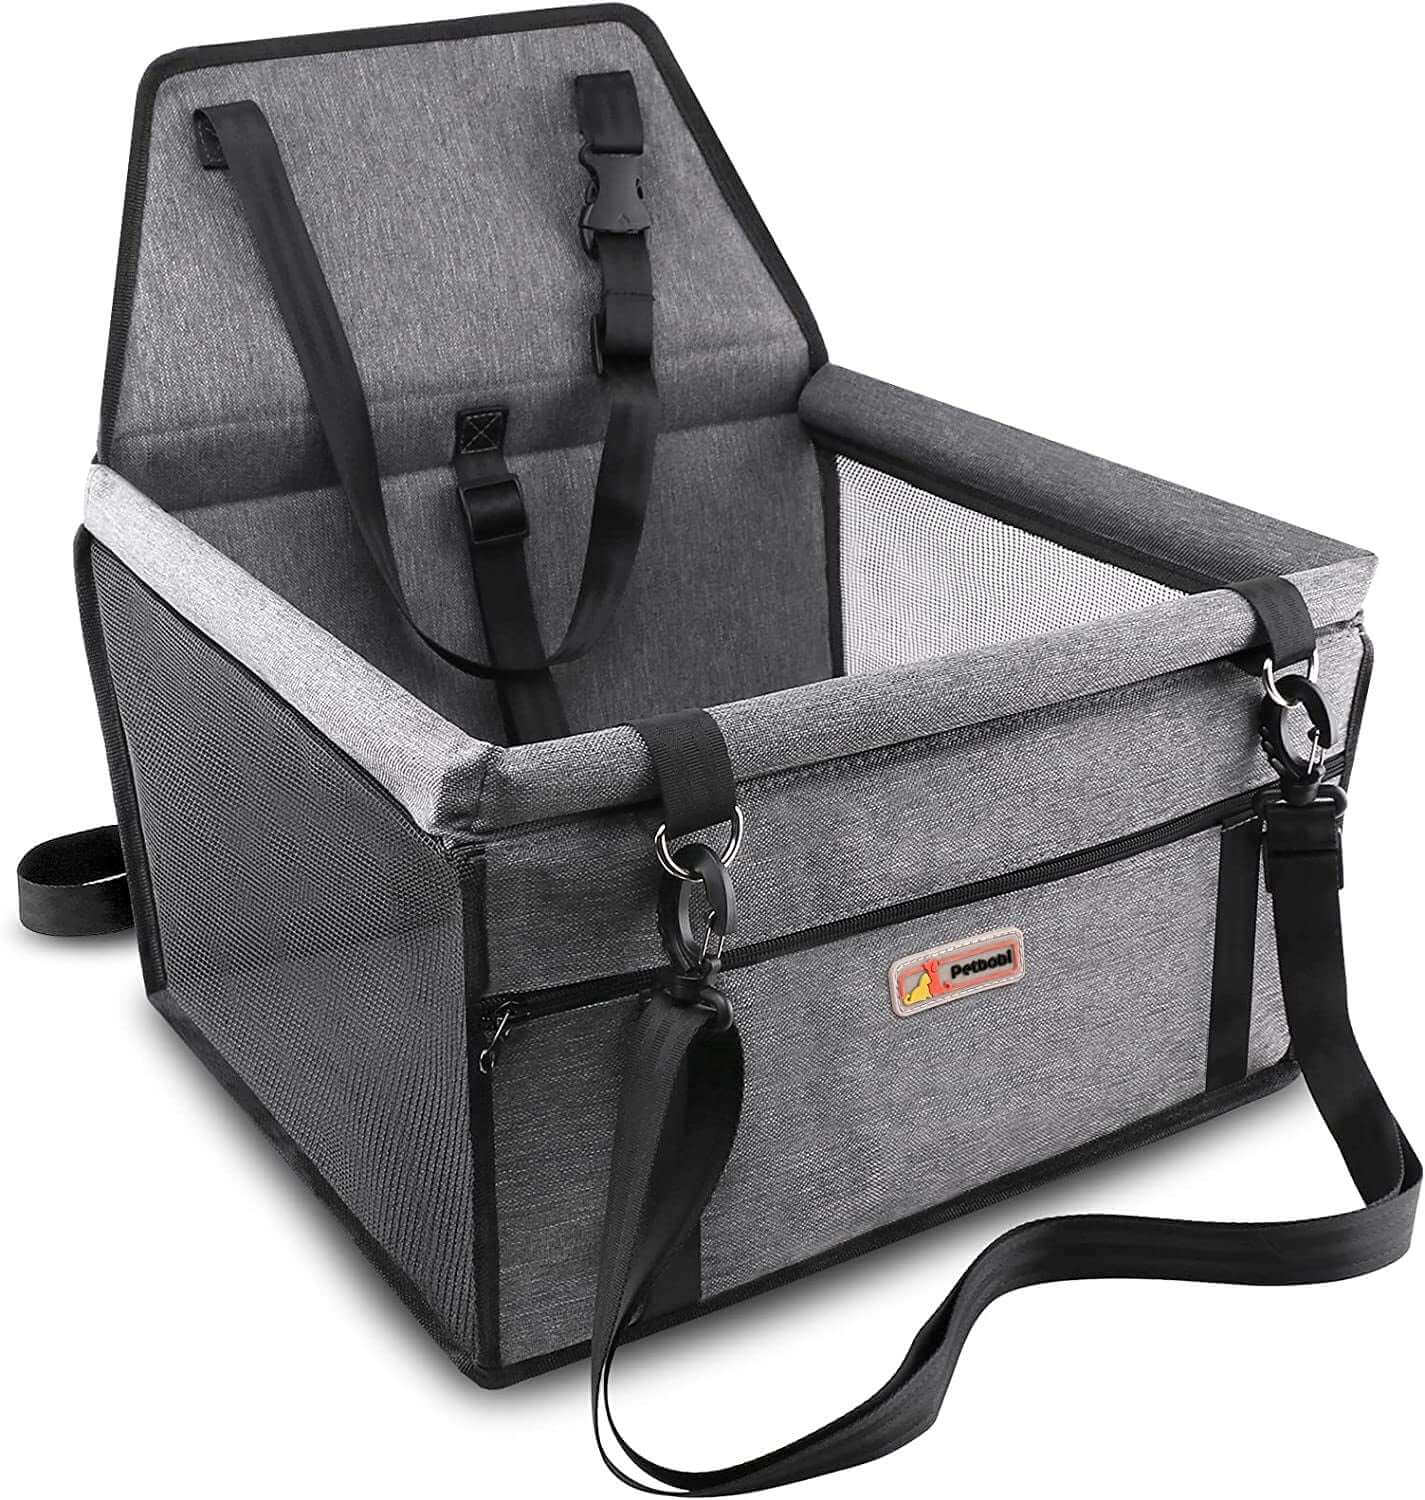  Portable and Breathable Dog Car Booster Seat with Seat Belt 